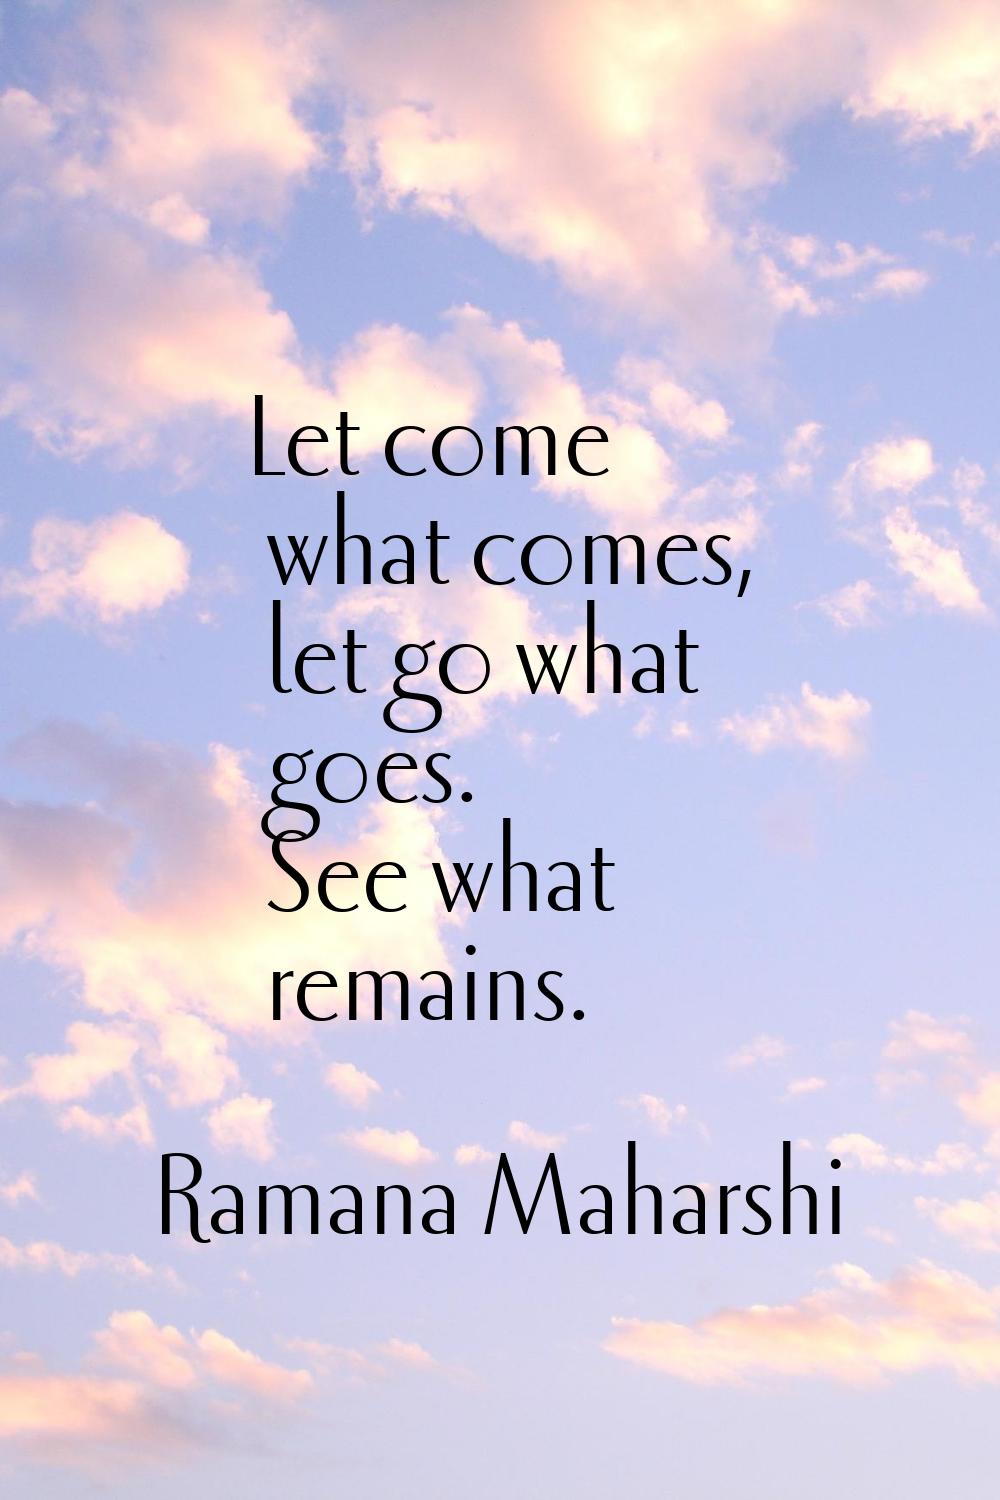 Let come what comes, let go what goes. See what remains.